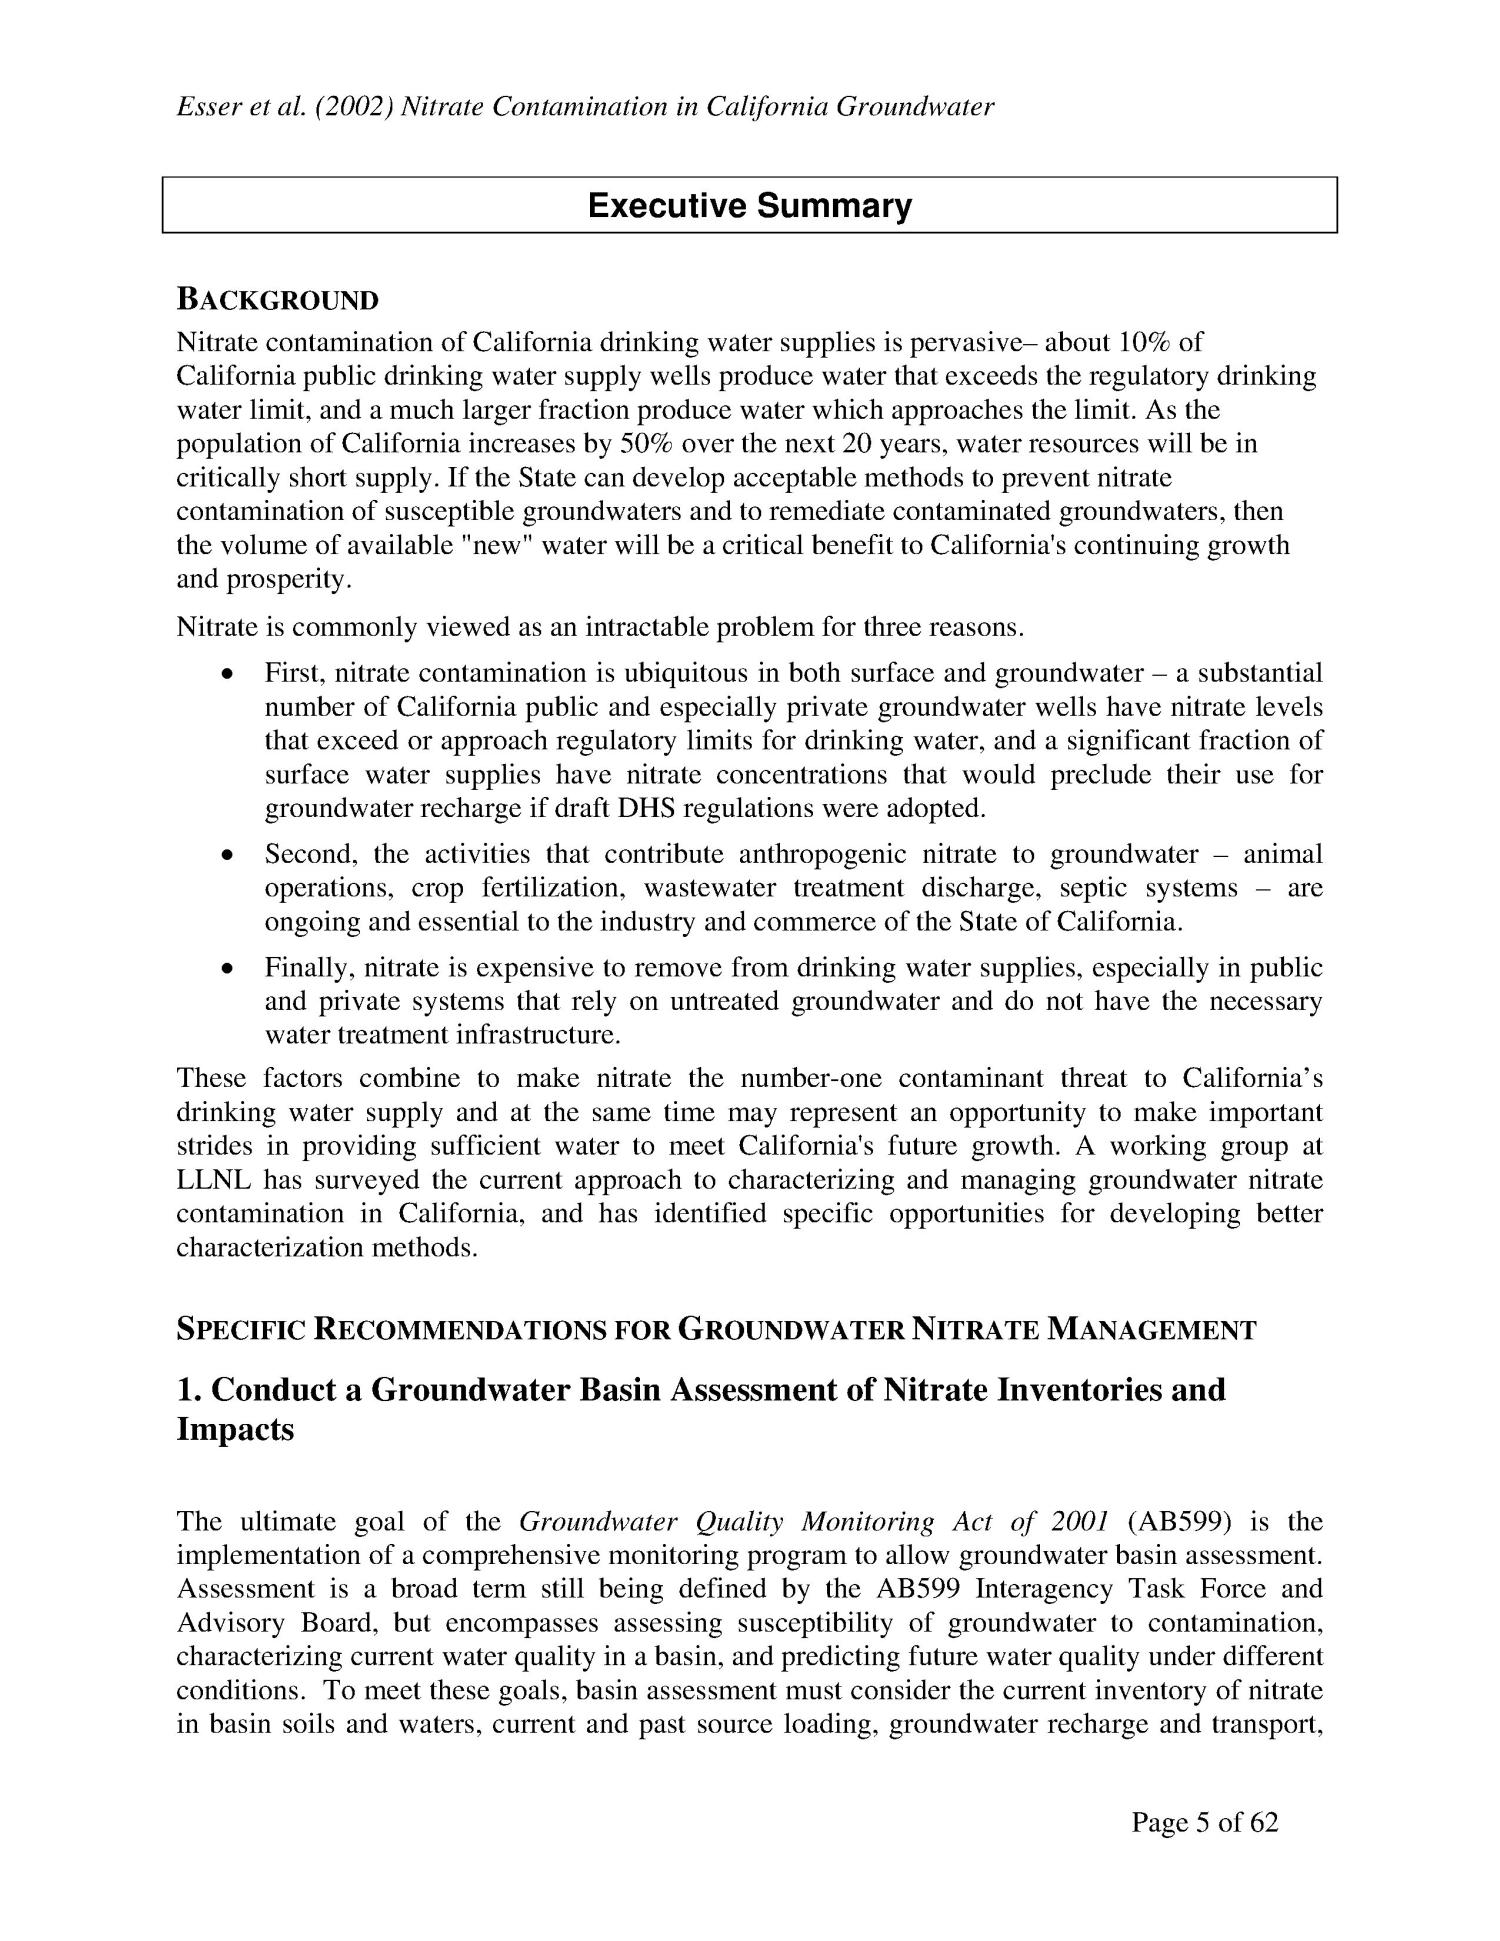 Nitrate Contamination in California Groundwater: An Integrated Approach to Basin Assessment and Resource Protection
                                                
                                                    [Sequence #]: 5 of 62
                                                